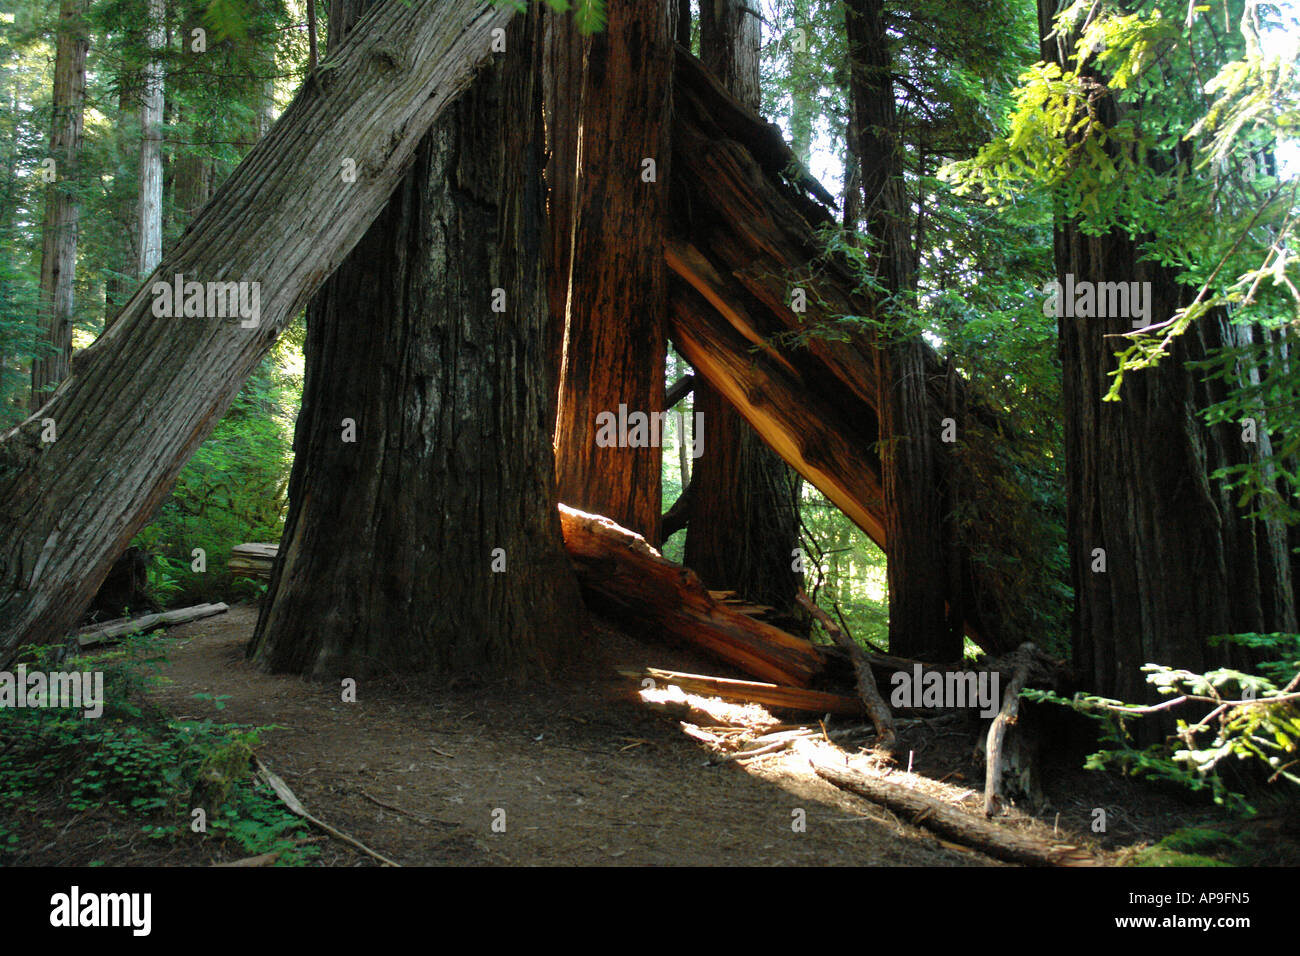 AJD51240, Jedediah Smith Redwoods State Park and Redwood National and State Parks, CA, California, Frank D. Stout Memorial Grove Stock Photo